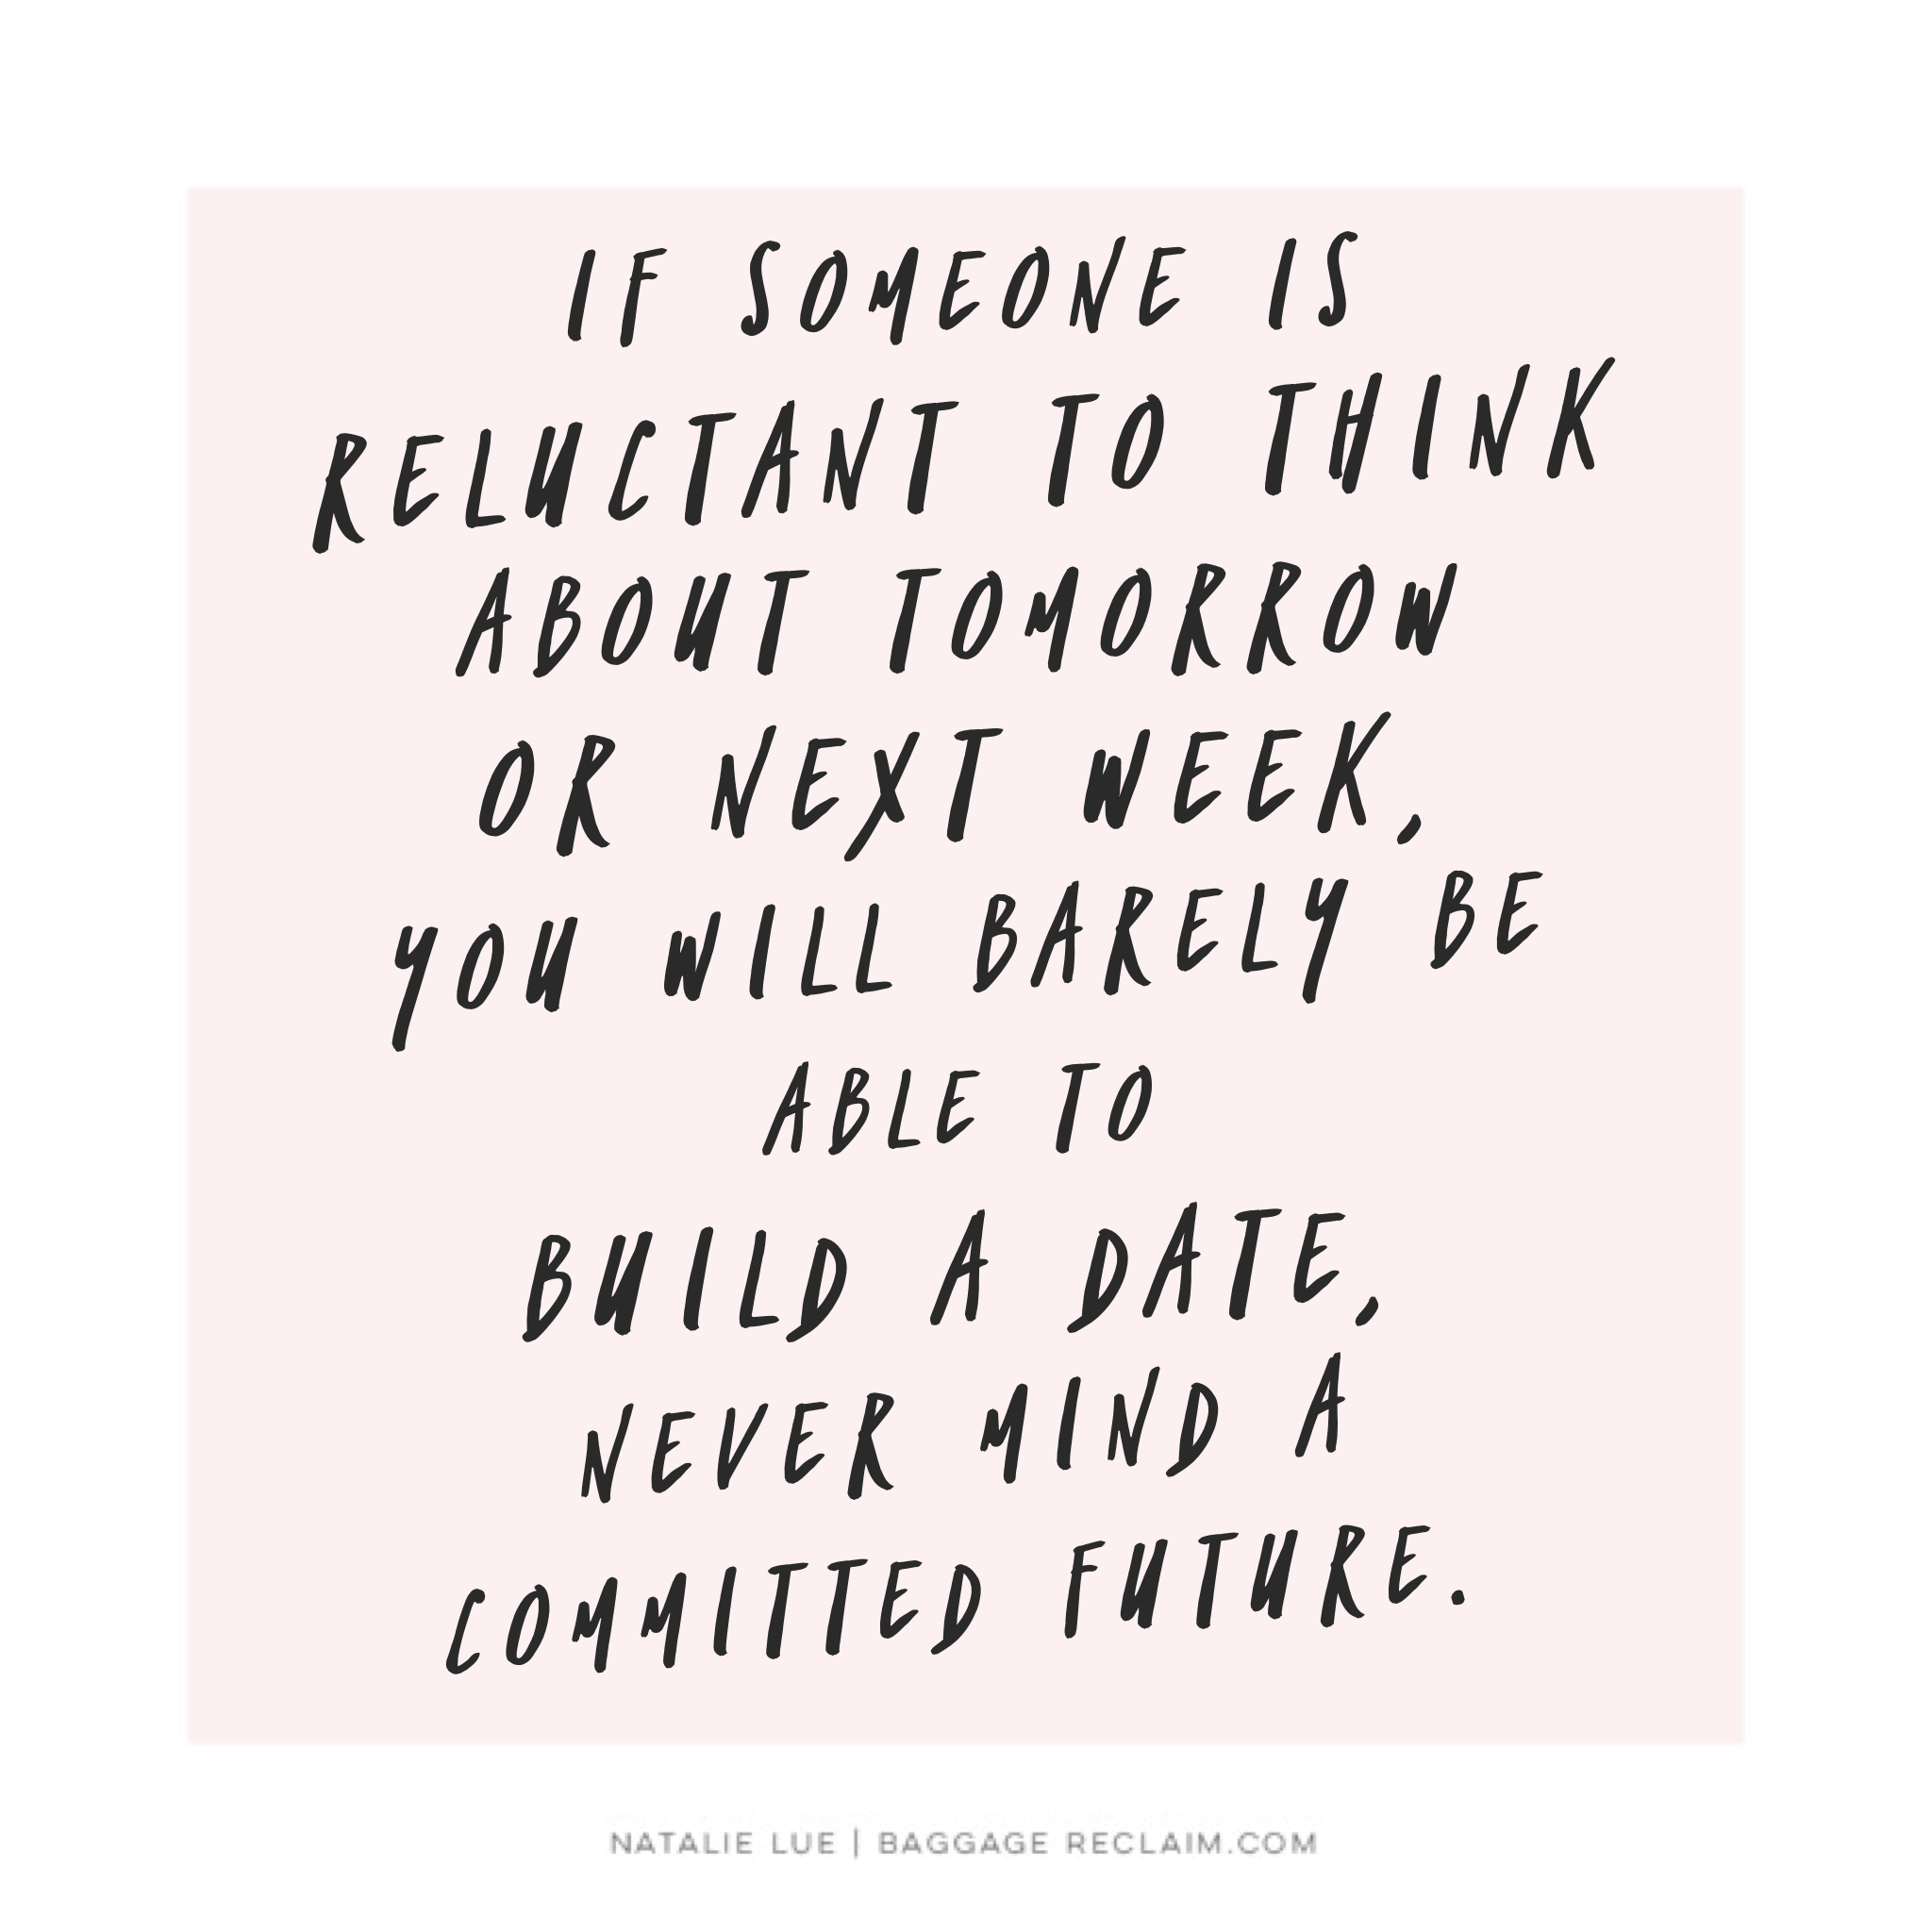 If someone is reluctant to think about tomorrow or next week, you will barely be able to build a date, never mind a committed future. 